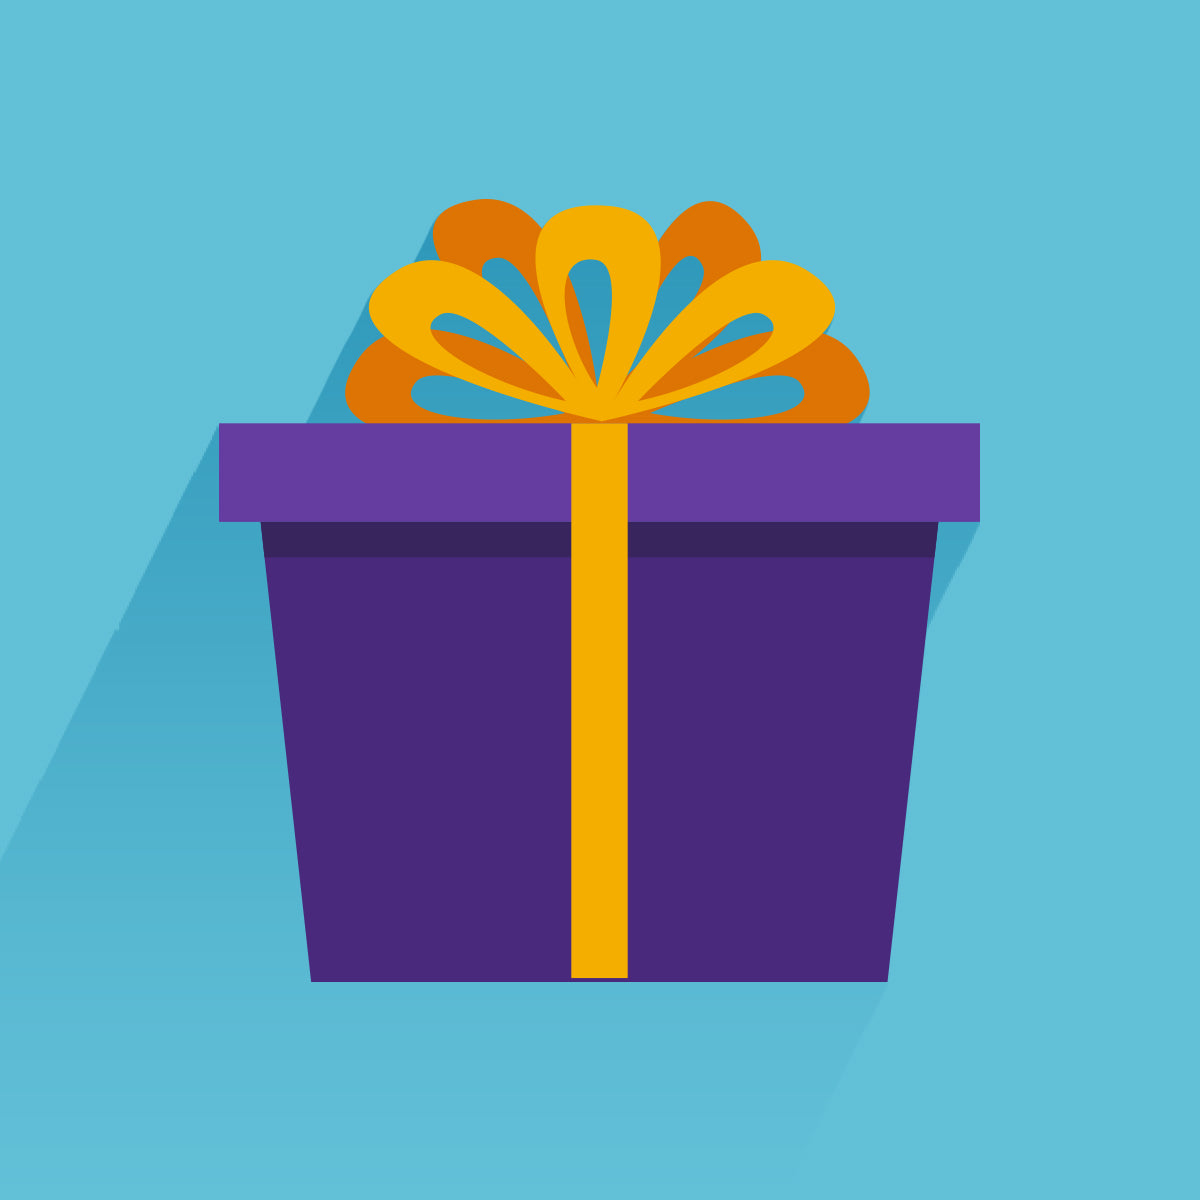 Hire Shopify Experts to integrate WrapItUp: Add Gift Wrap & Msg app into a Shopify store